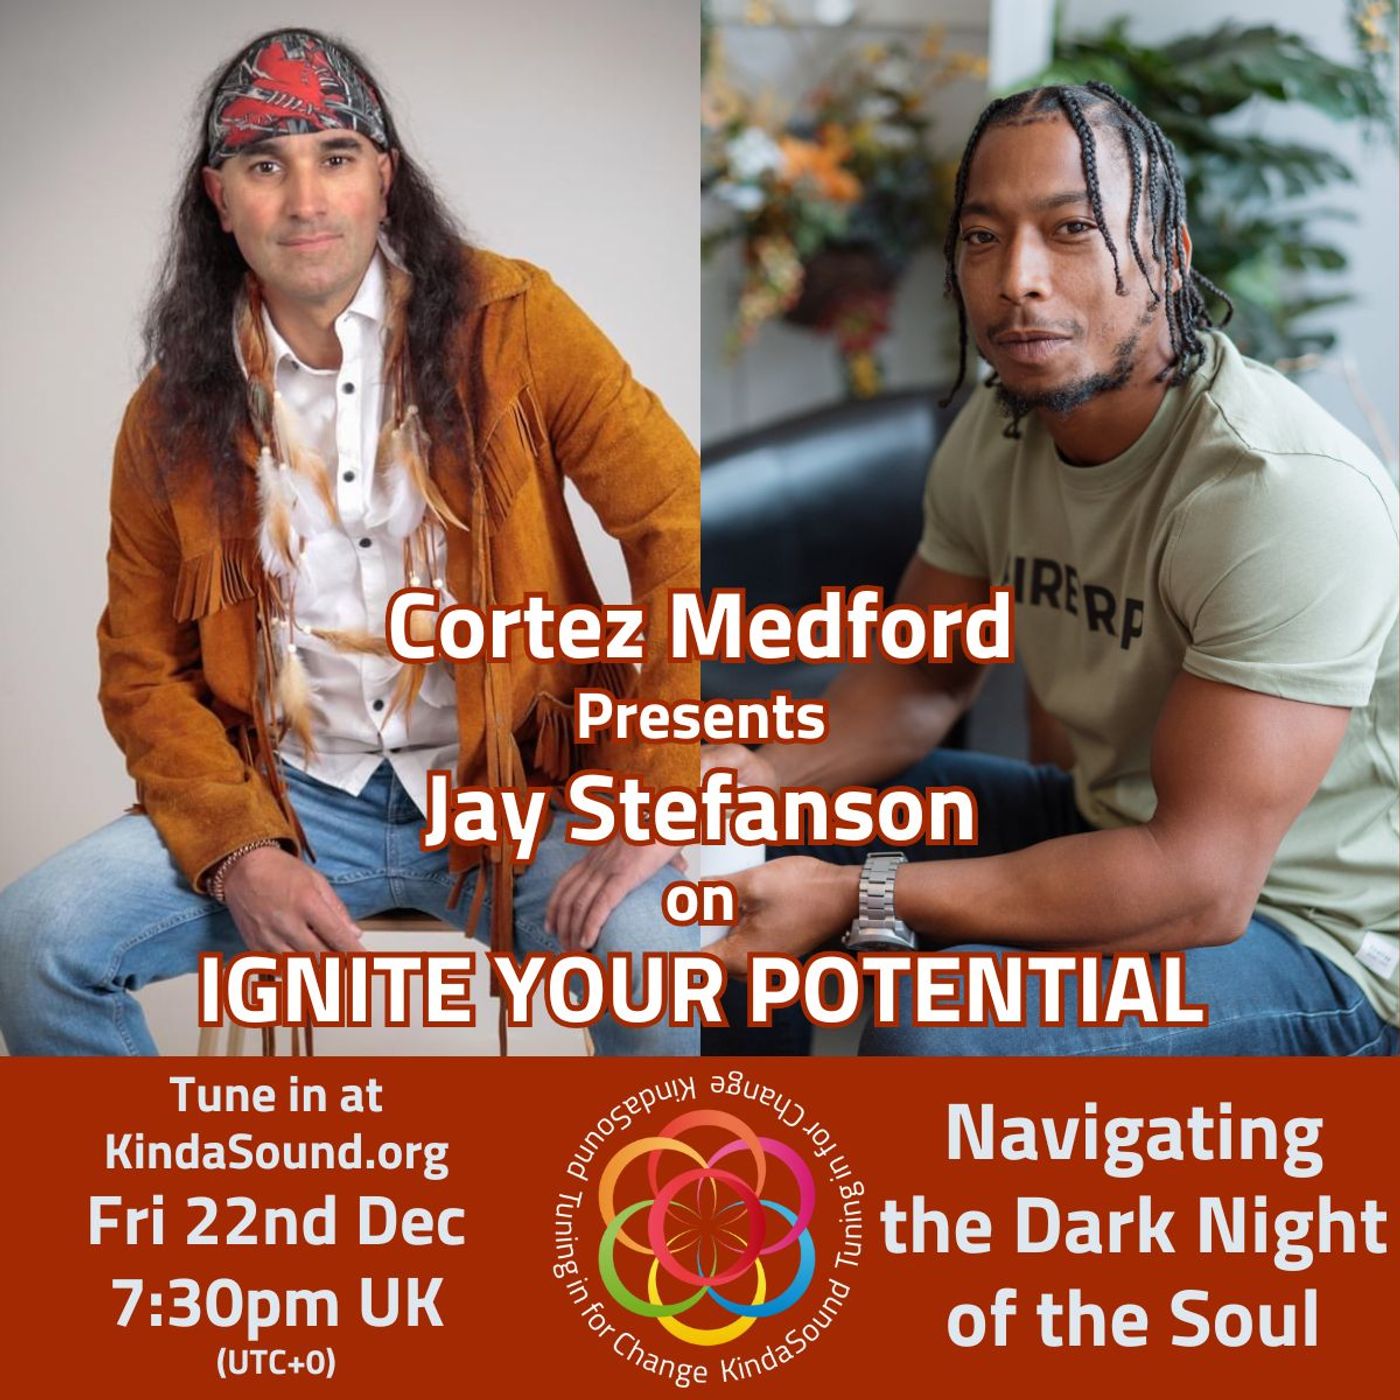 Navigating the Dark Night of the Soul | Jay Stefanson on Ignite Your Potential with Cortez Medford